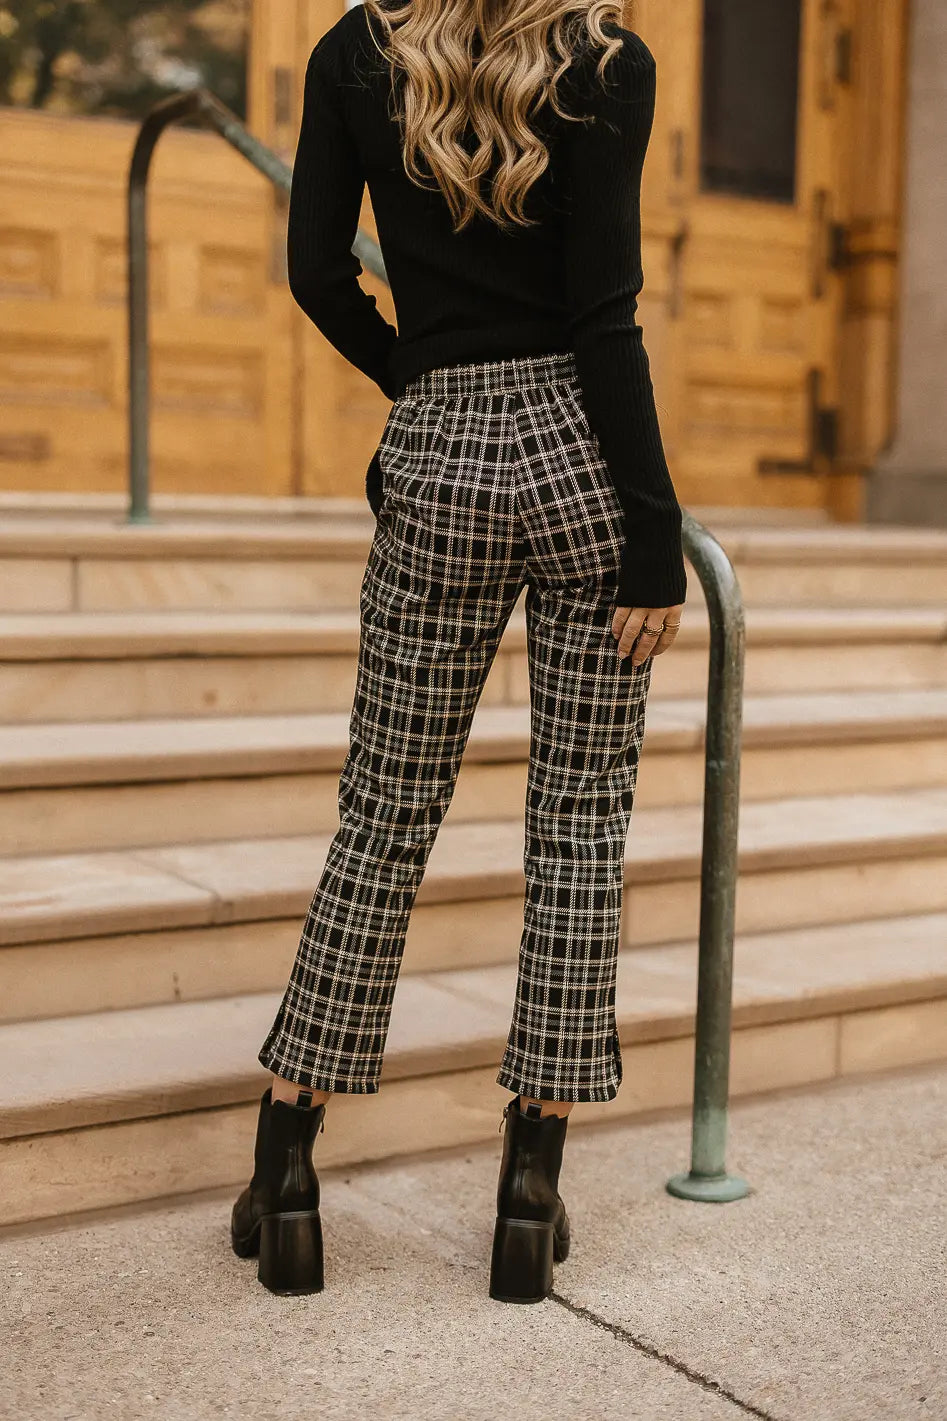 Woman in Black and White Checkered Long Sleeve Shirt and Black Pants · Free  Stock Photo